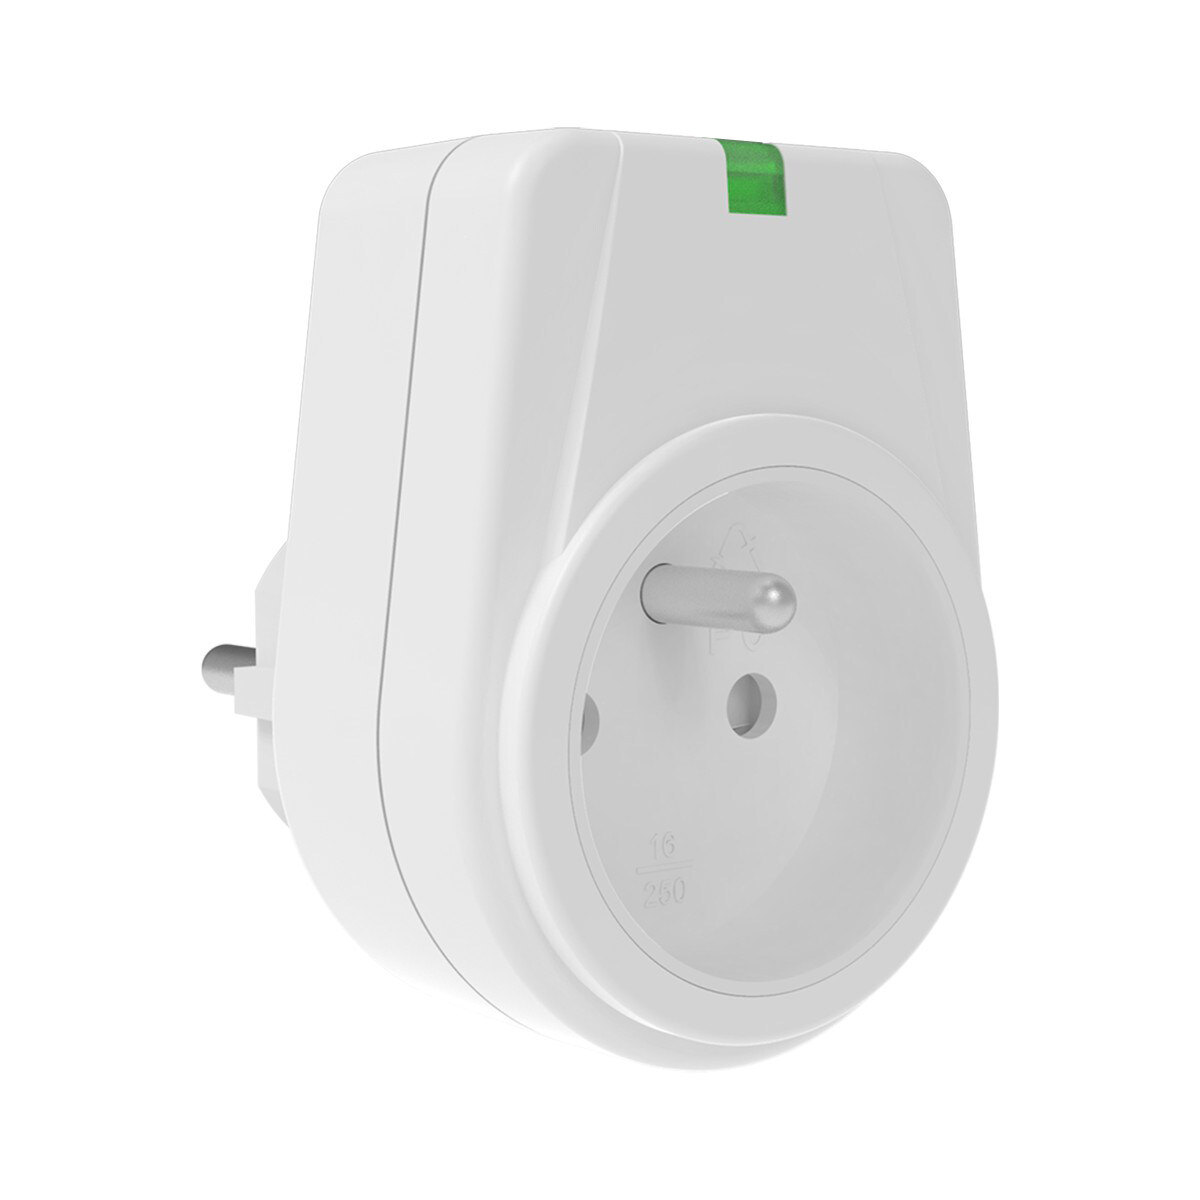 WiFi Socket With Power meter, Support App remote control RSN913R